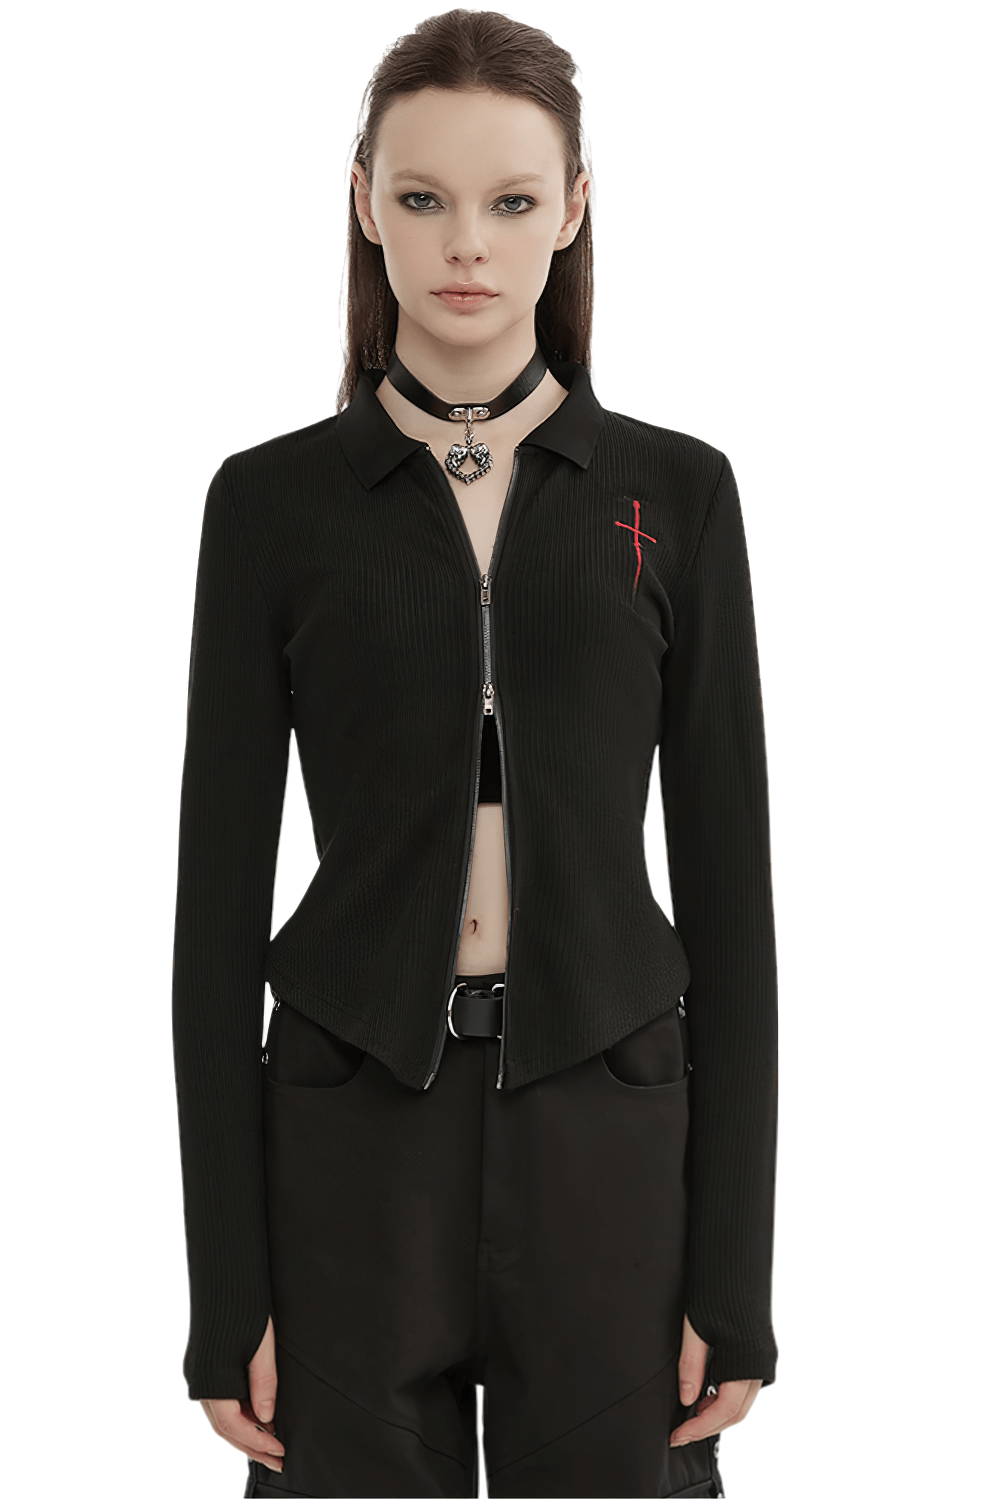 Women's Knitted Zippered Top with Embroidered Red Cross